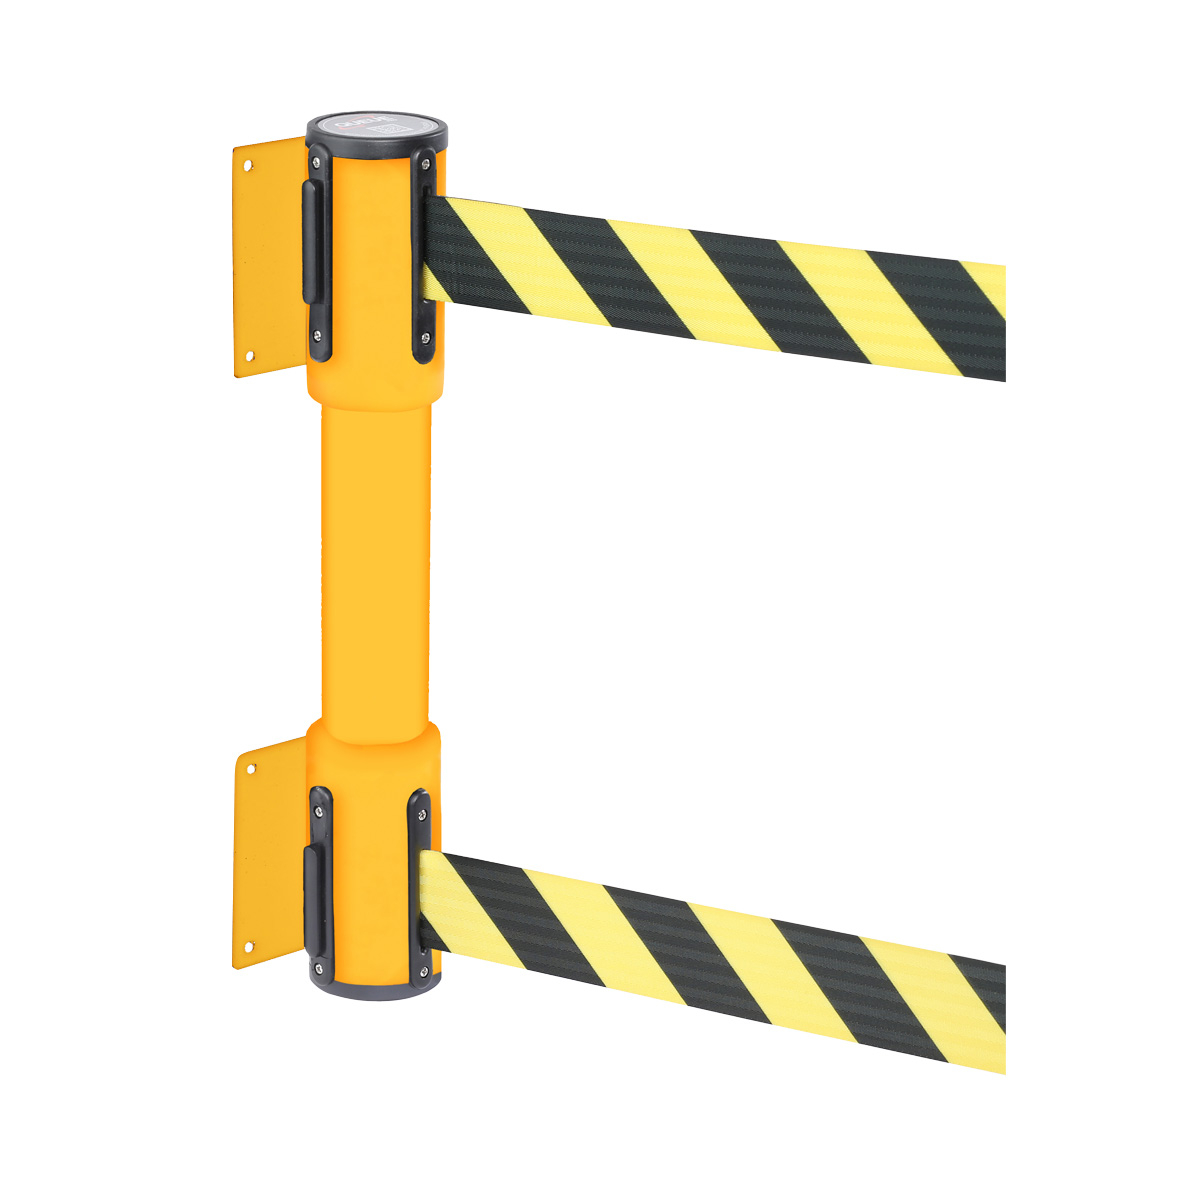 WallMaster Twin Wall Mounted Belt Barriers Are Available in Two Finished - Black And Yellow